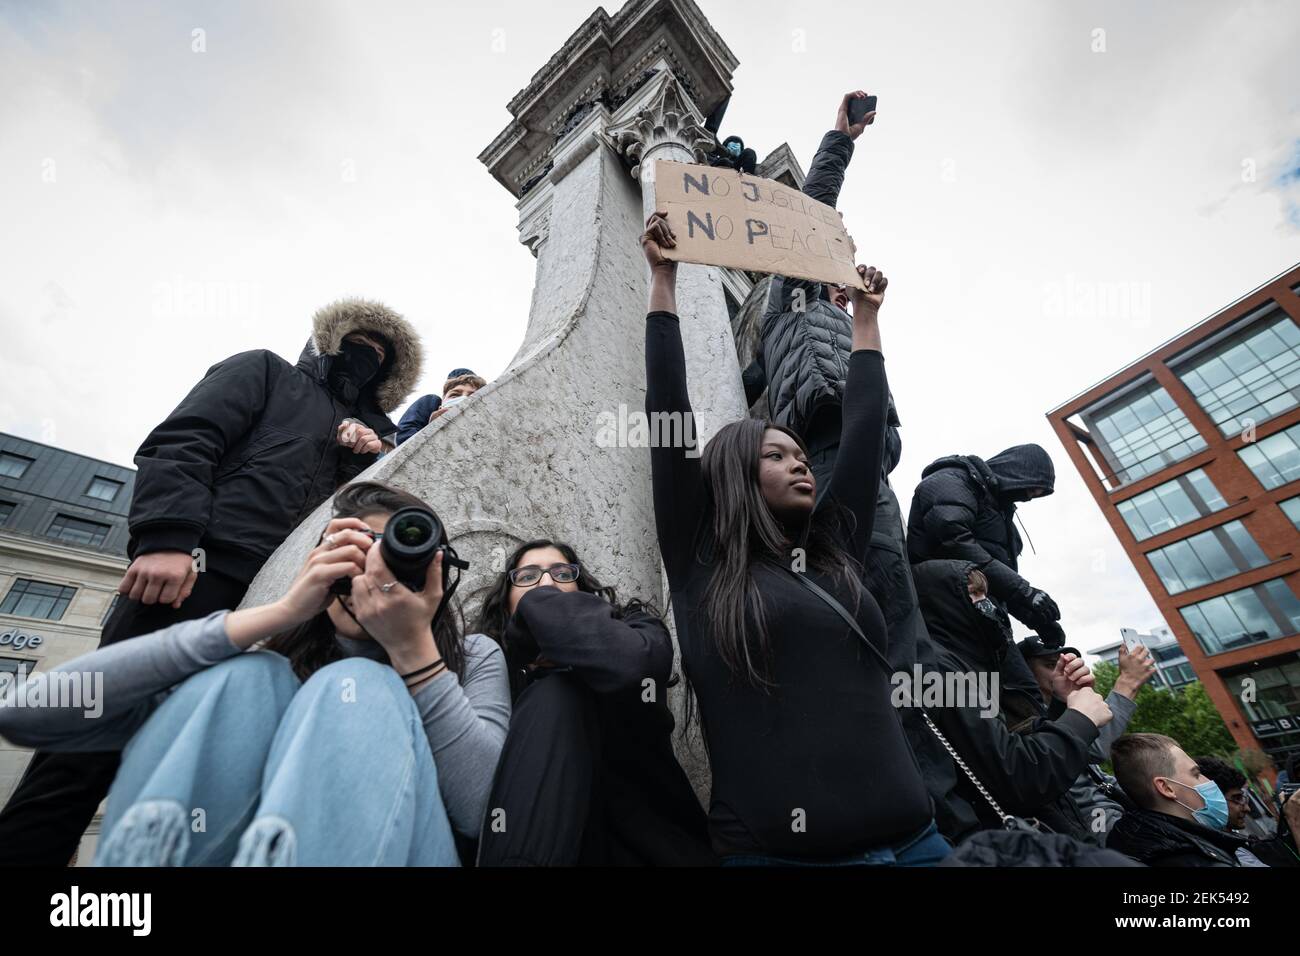 A protester holds a placard that says No Justice, No Peace during the demonstration. Thousands of people attend the most recent 'Black Lives Matter' protest in Manchester's city centre following the death of George Floyd in the USA. (Photo by Kenny Brown / SOPA Images/Sipa USA)  Stock Photo